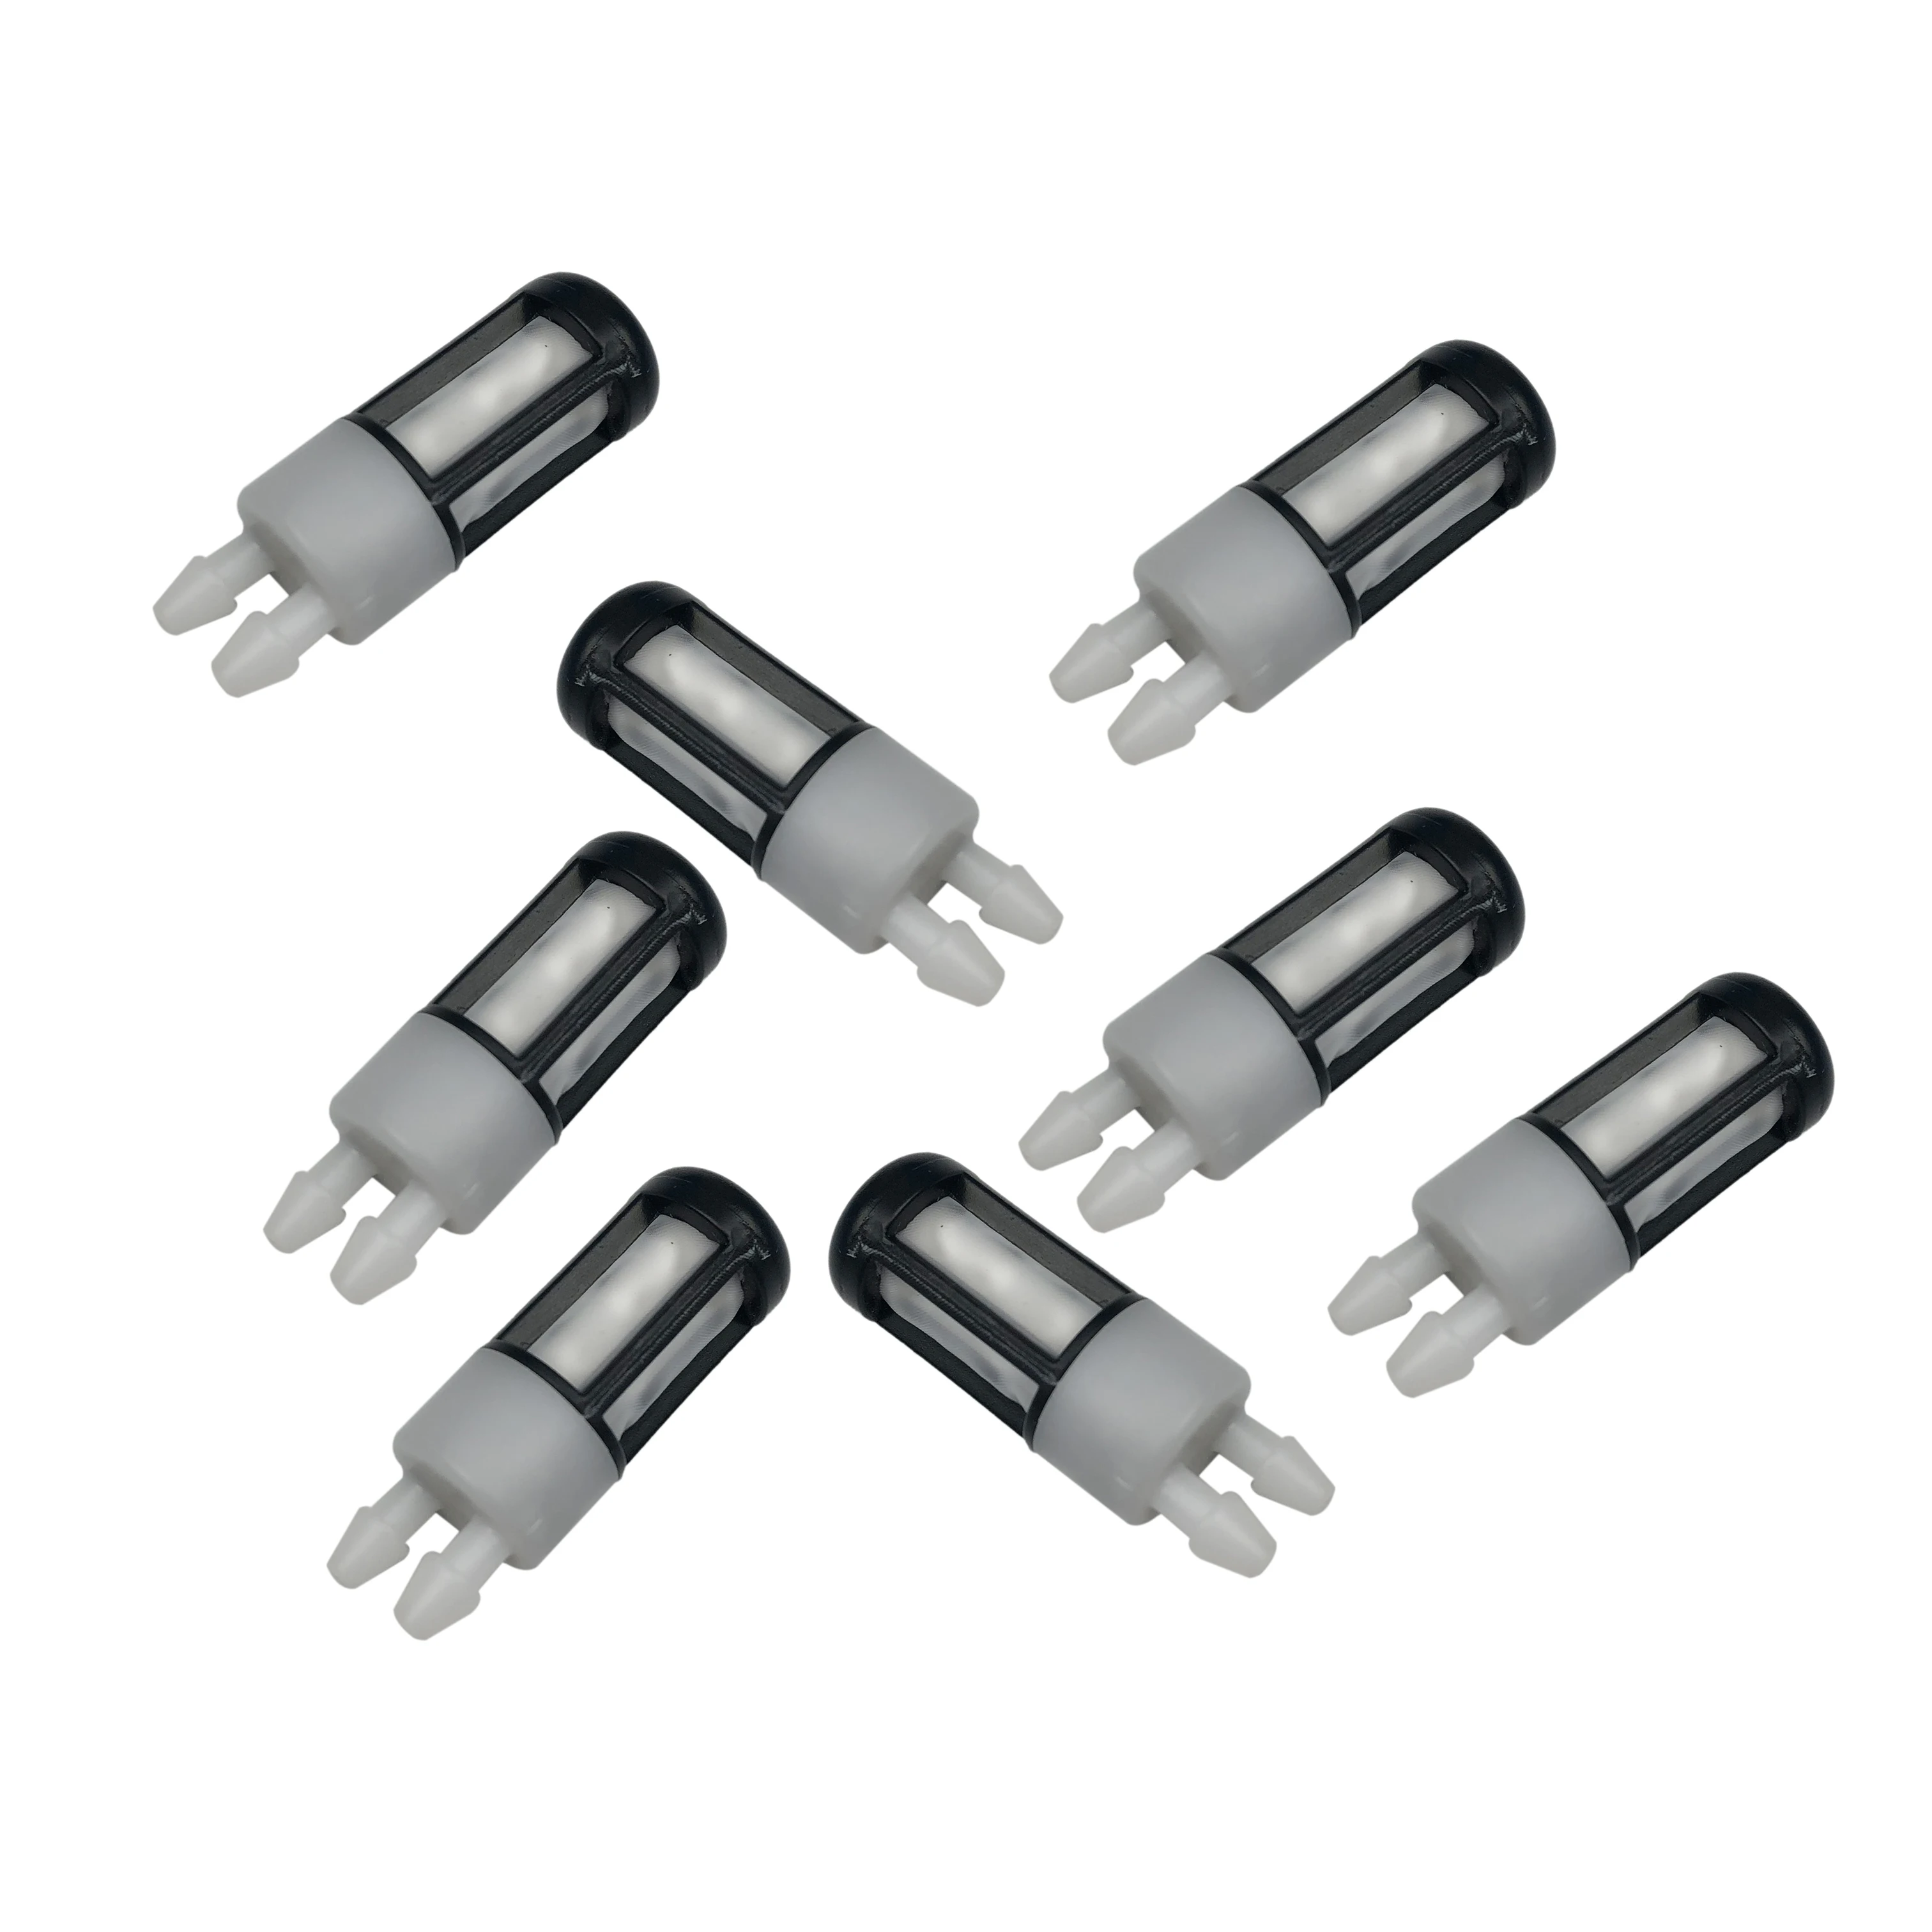 

10pcs/lot Dual Port Fuel Filter Fit For Stihl BR600 BR550 BR500 Leaf Blower 4282 007 3600 Replacement 0000 350 3514 00003503514